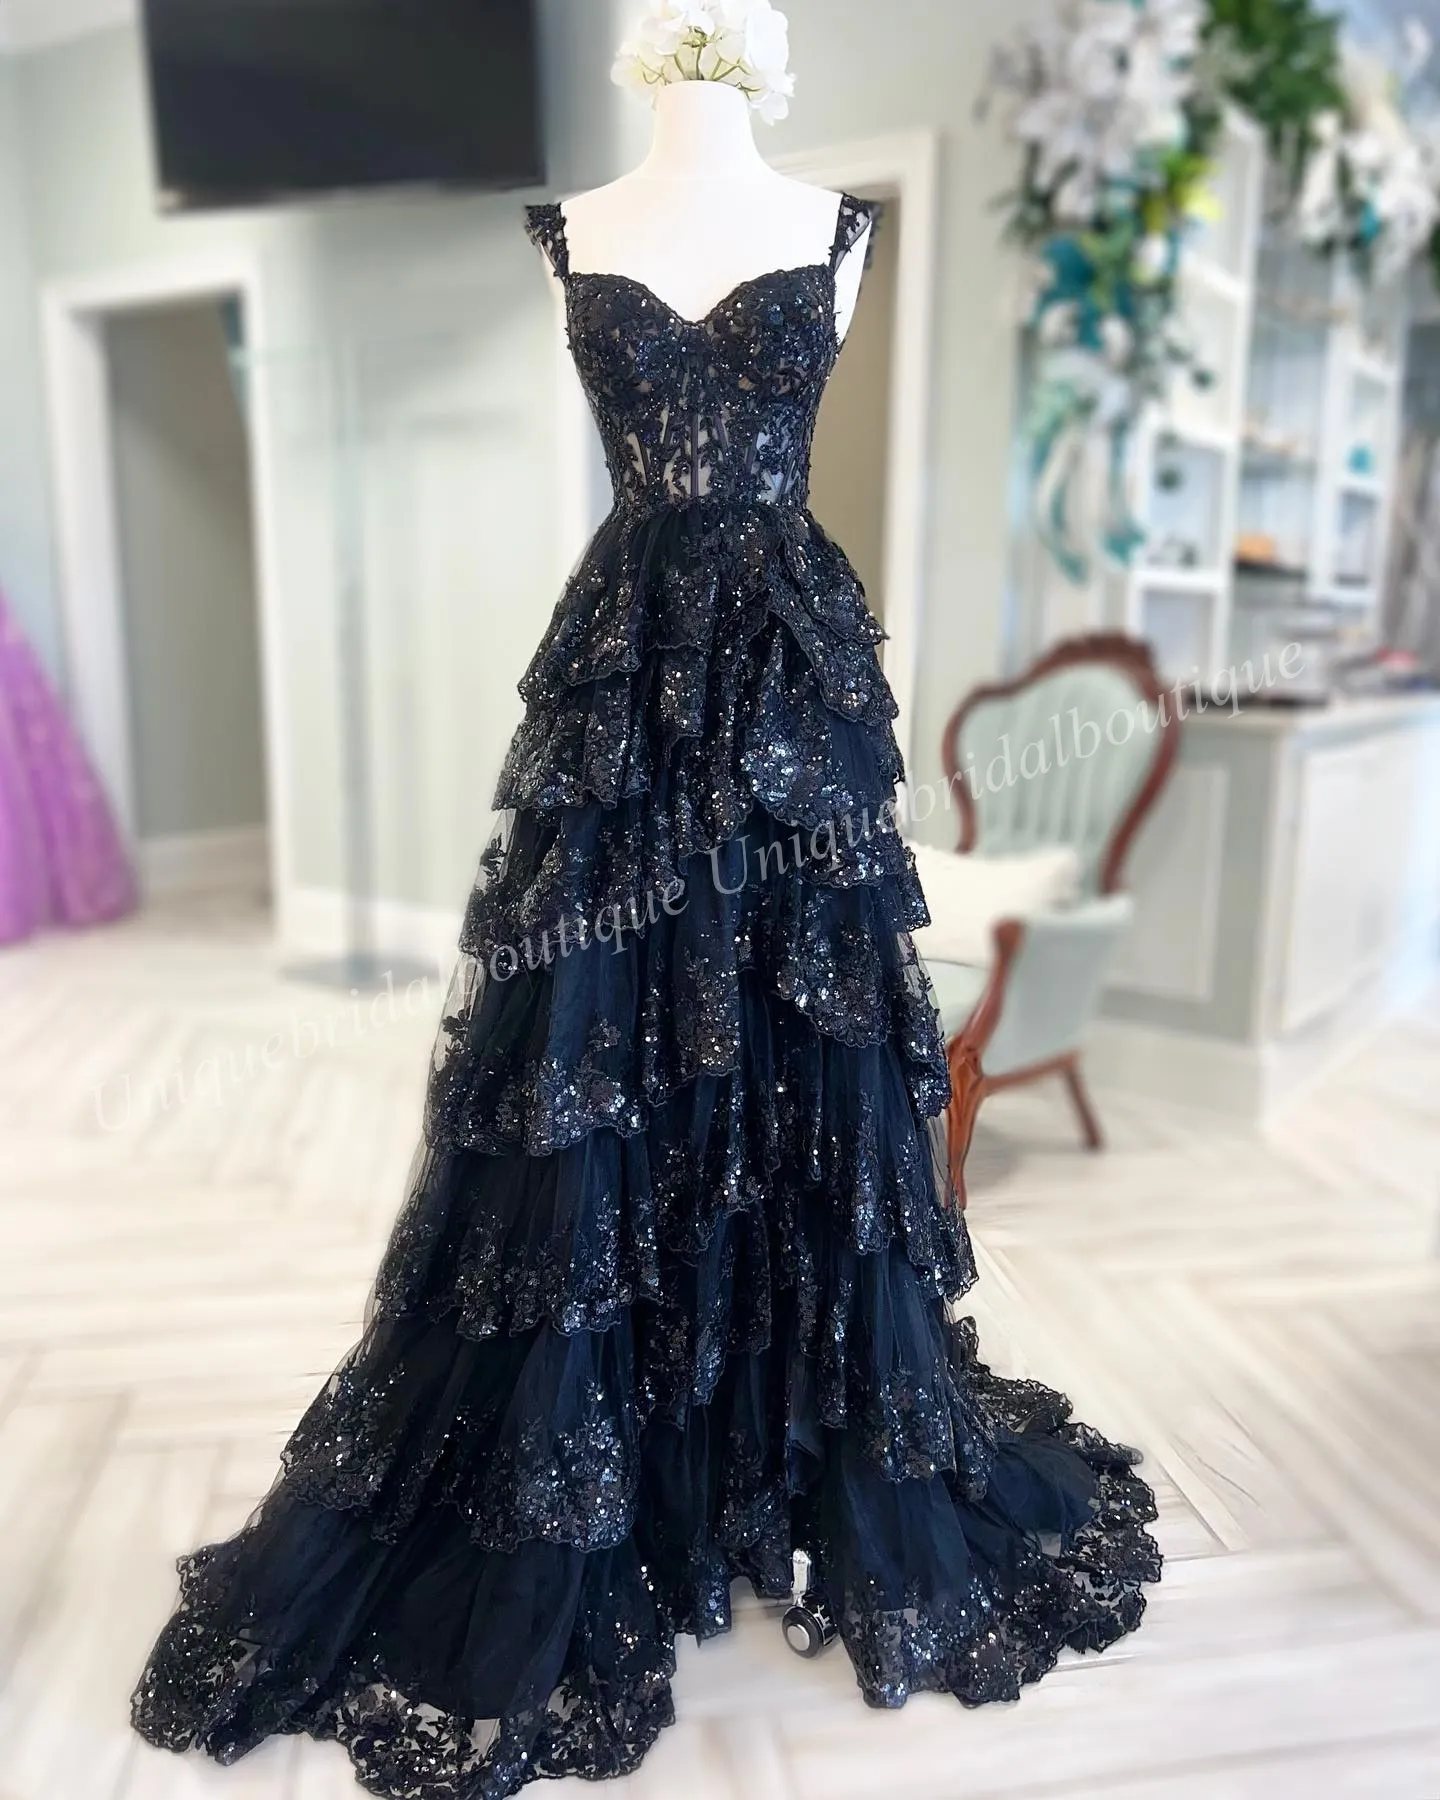 Black Tulle Off Shoulder Lace Corset Prom Dress With Ruffle High Slit Skirt  And Corset Detail Perfect For Pageants, Formal Events, Weddings, And Red  Carpet Parties From Uniquebridalboutique, $128.39